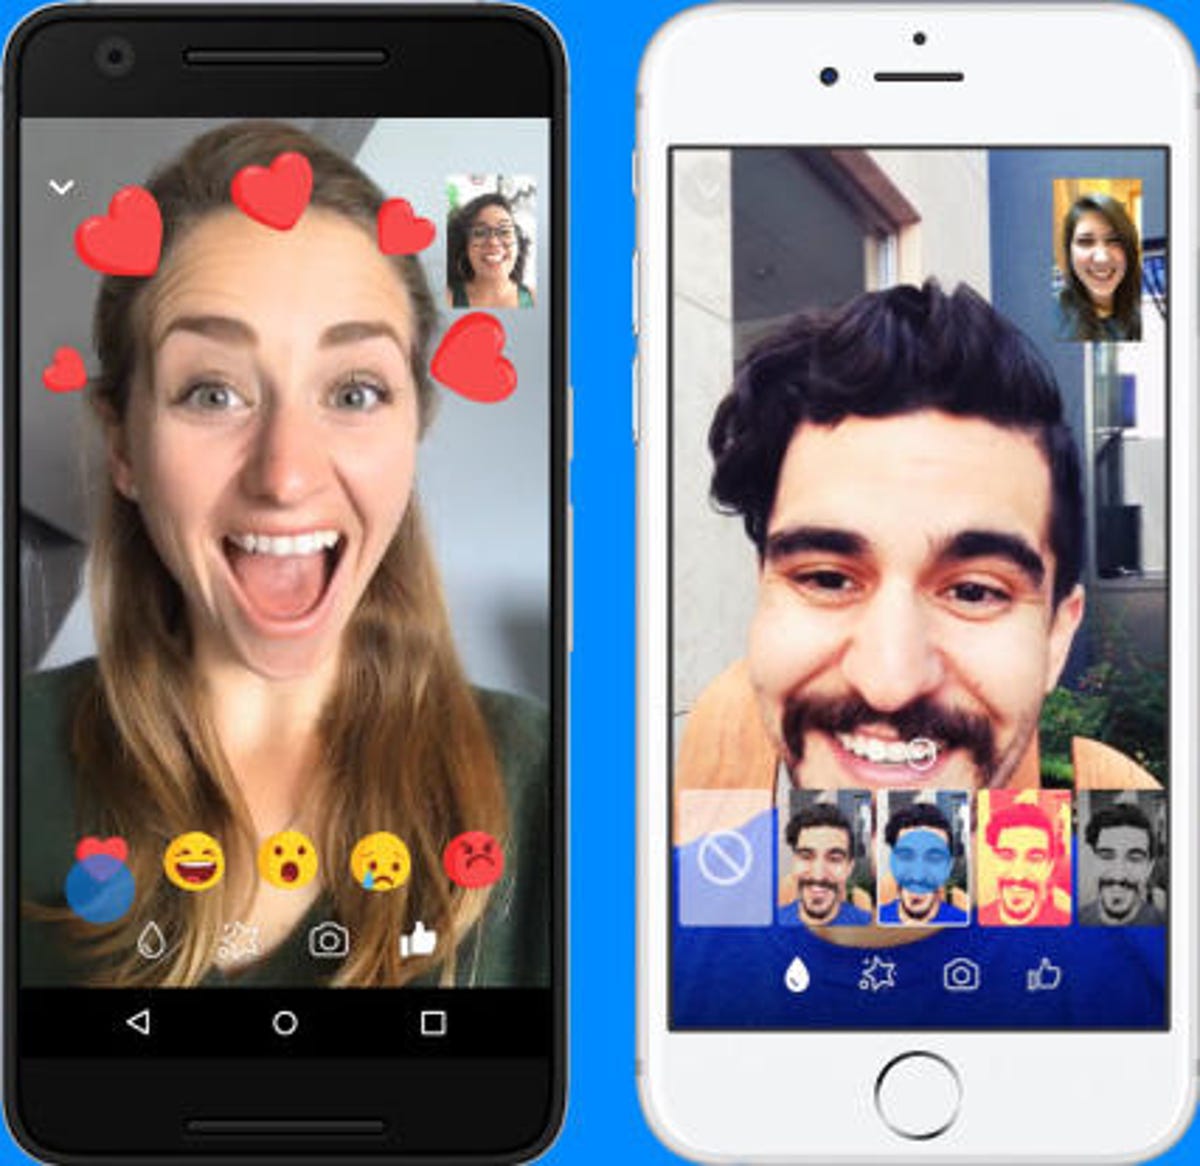 10 Facebook Messenger tips newbies need to know - CNET